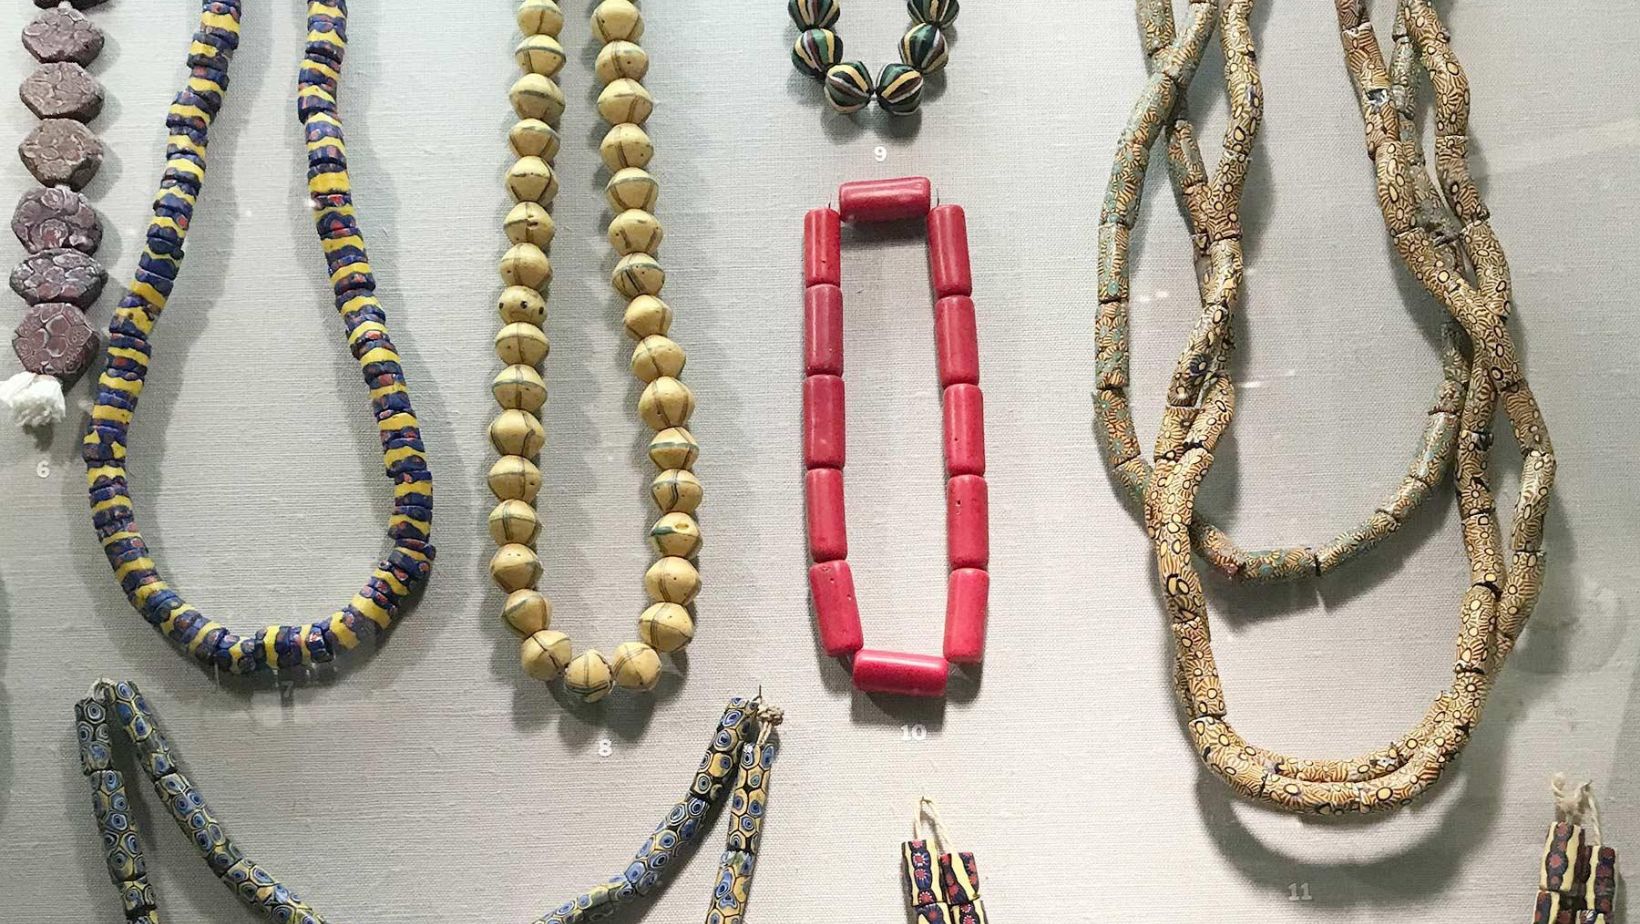 Ancient glass jewelry beads, bracelets, and necklaces